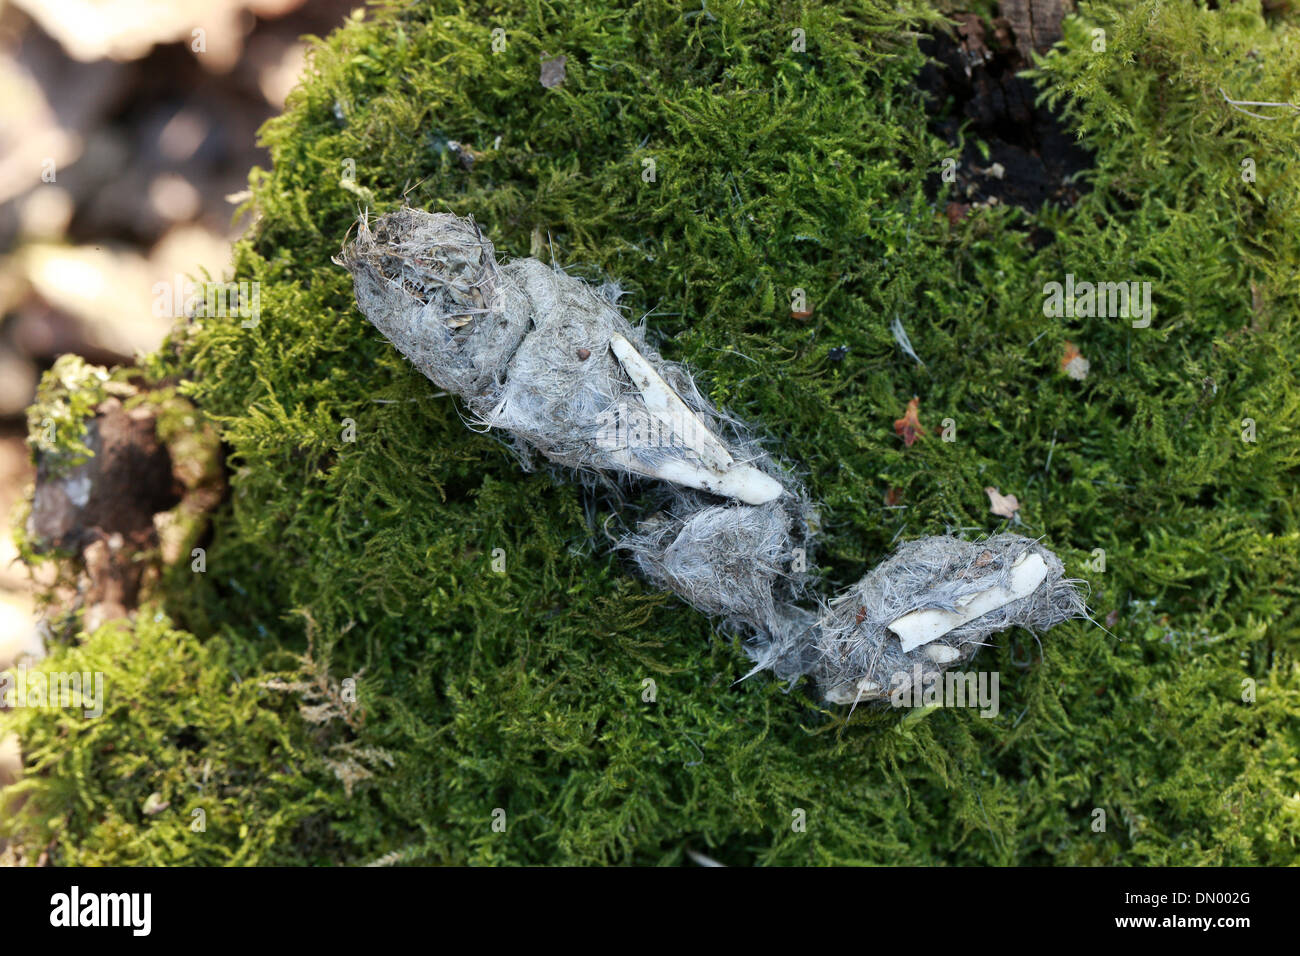 Owl Pellet Containing Hair and Bone Fragments Stock Photo